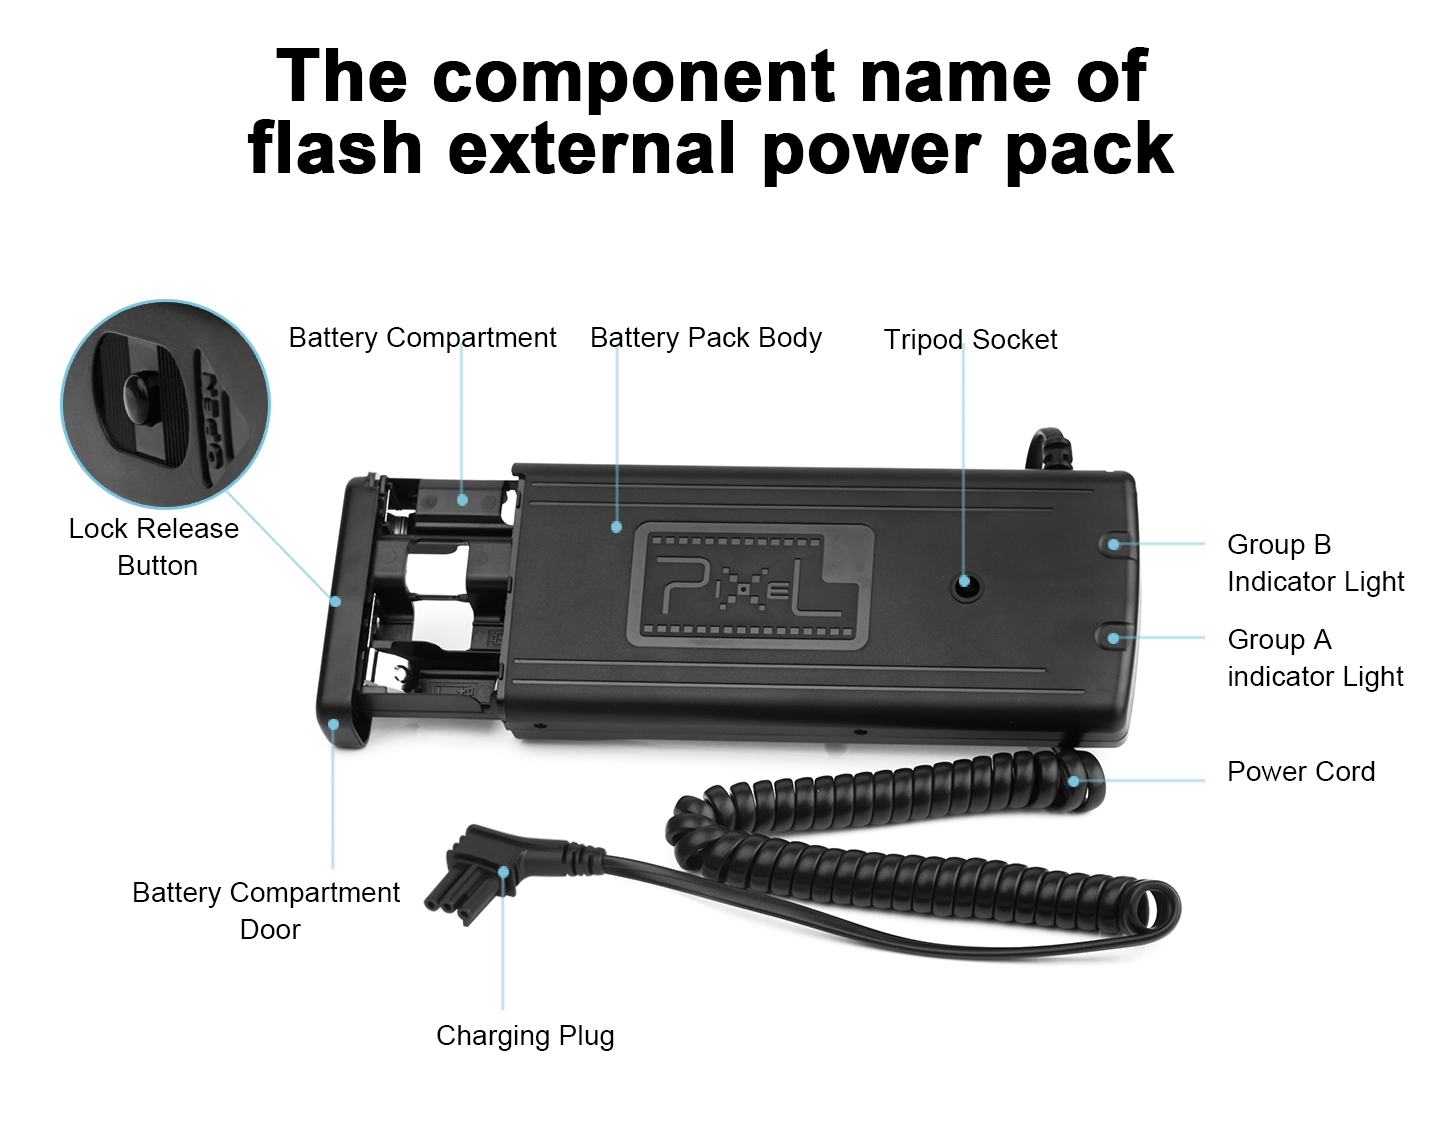 The component name of flash external power pack